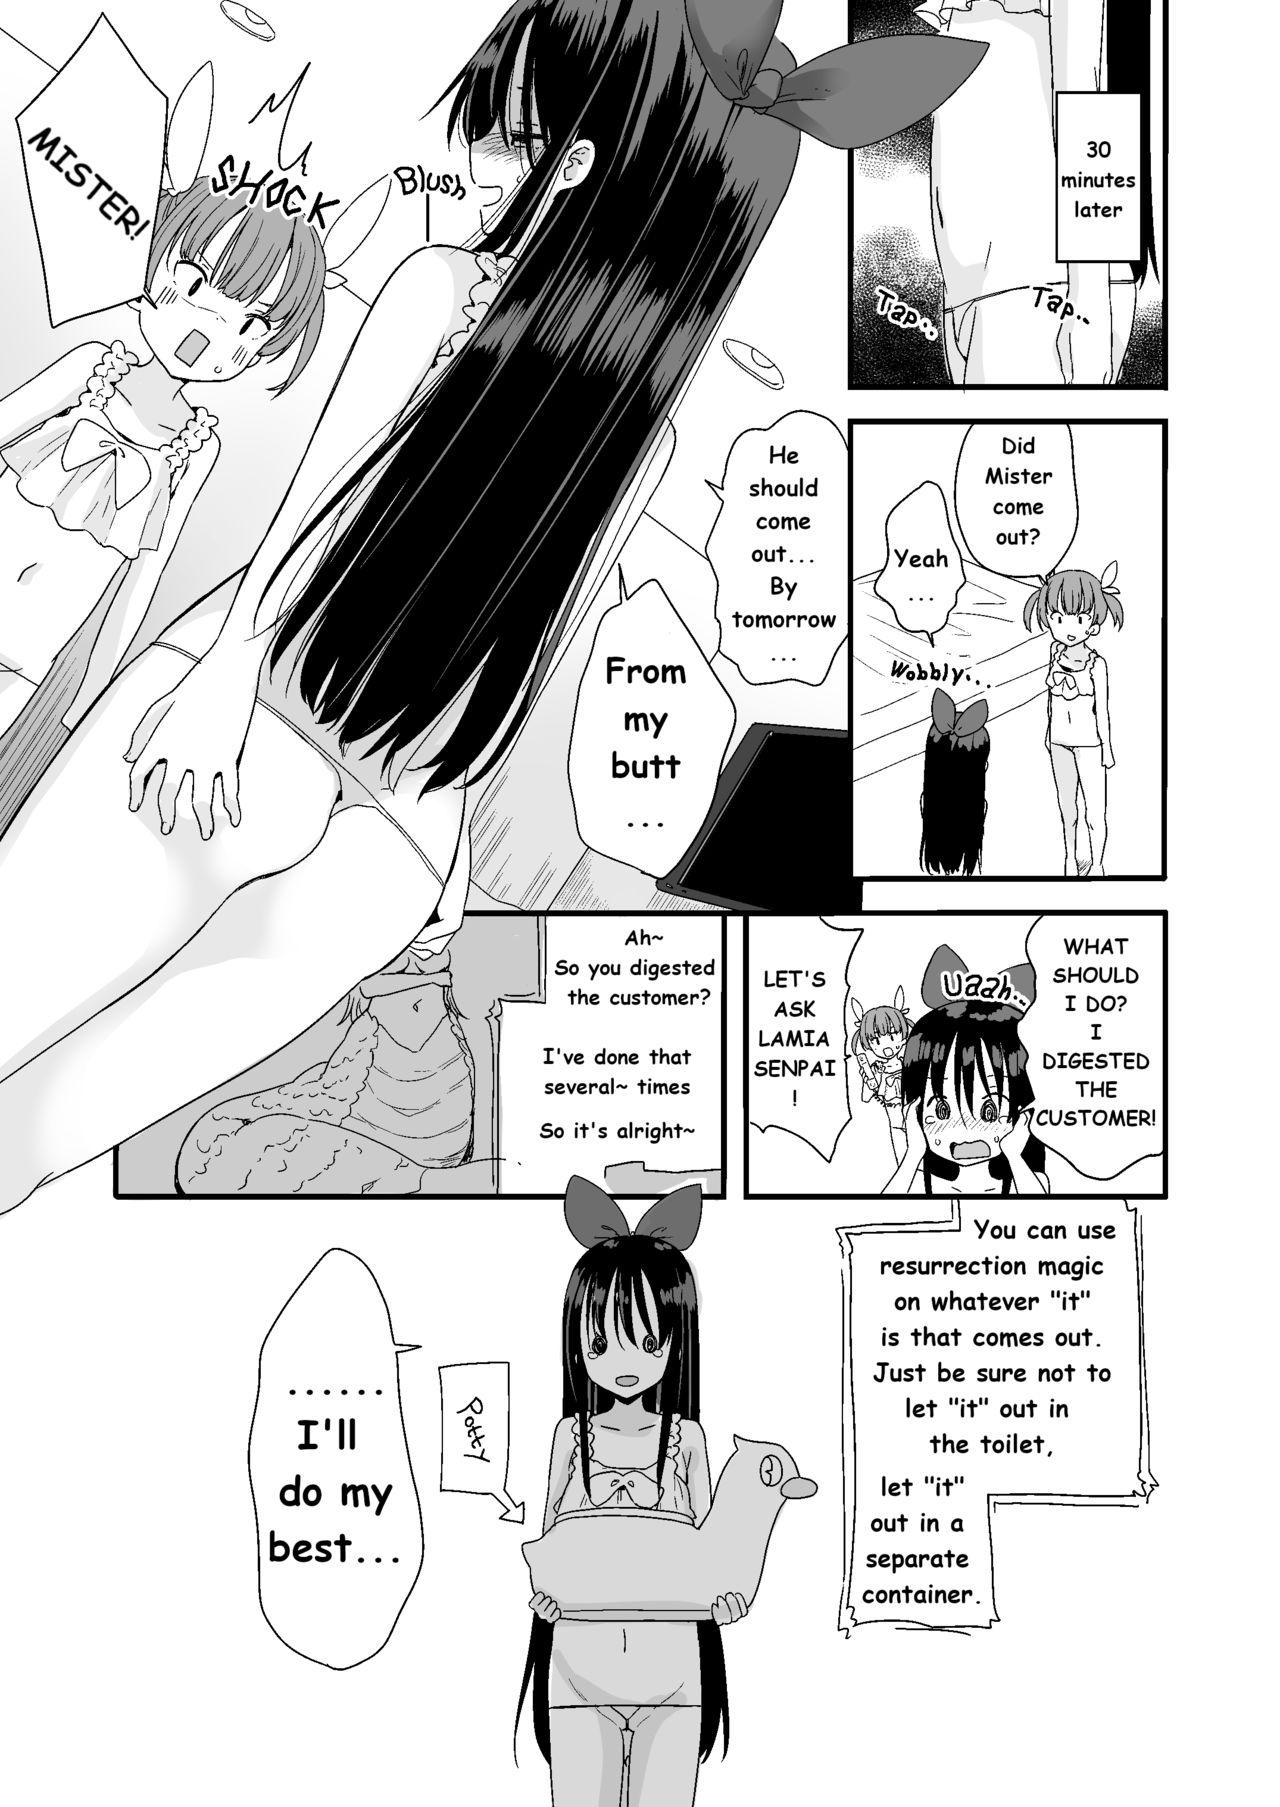 Collar Nightmare House e Youkoso | Welcome to the Nightmare House - Original Big Ass - Page 13